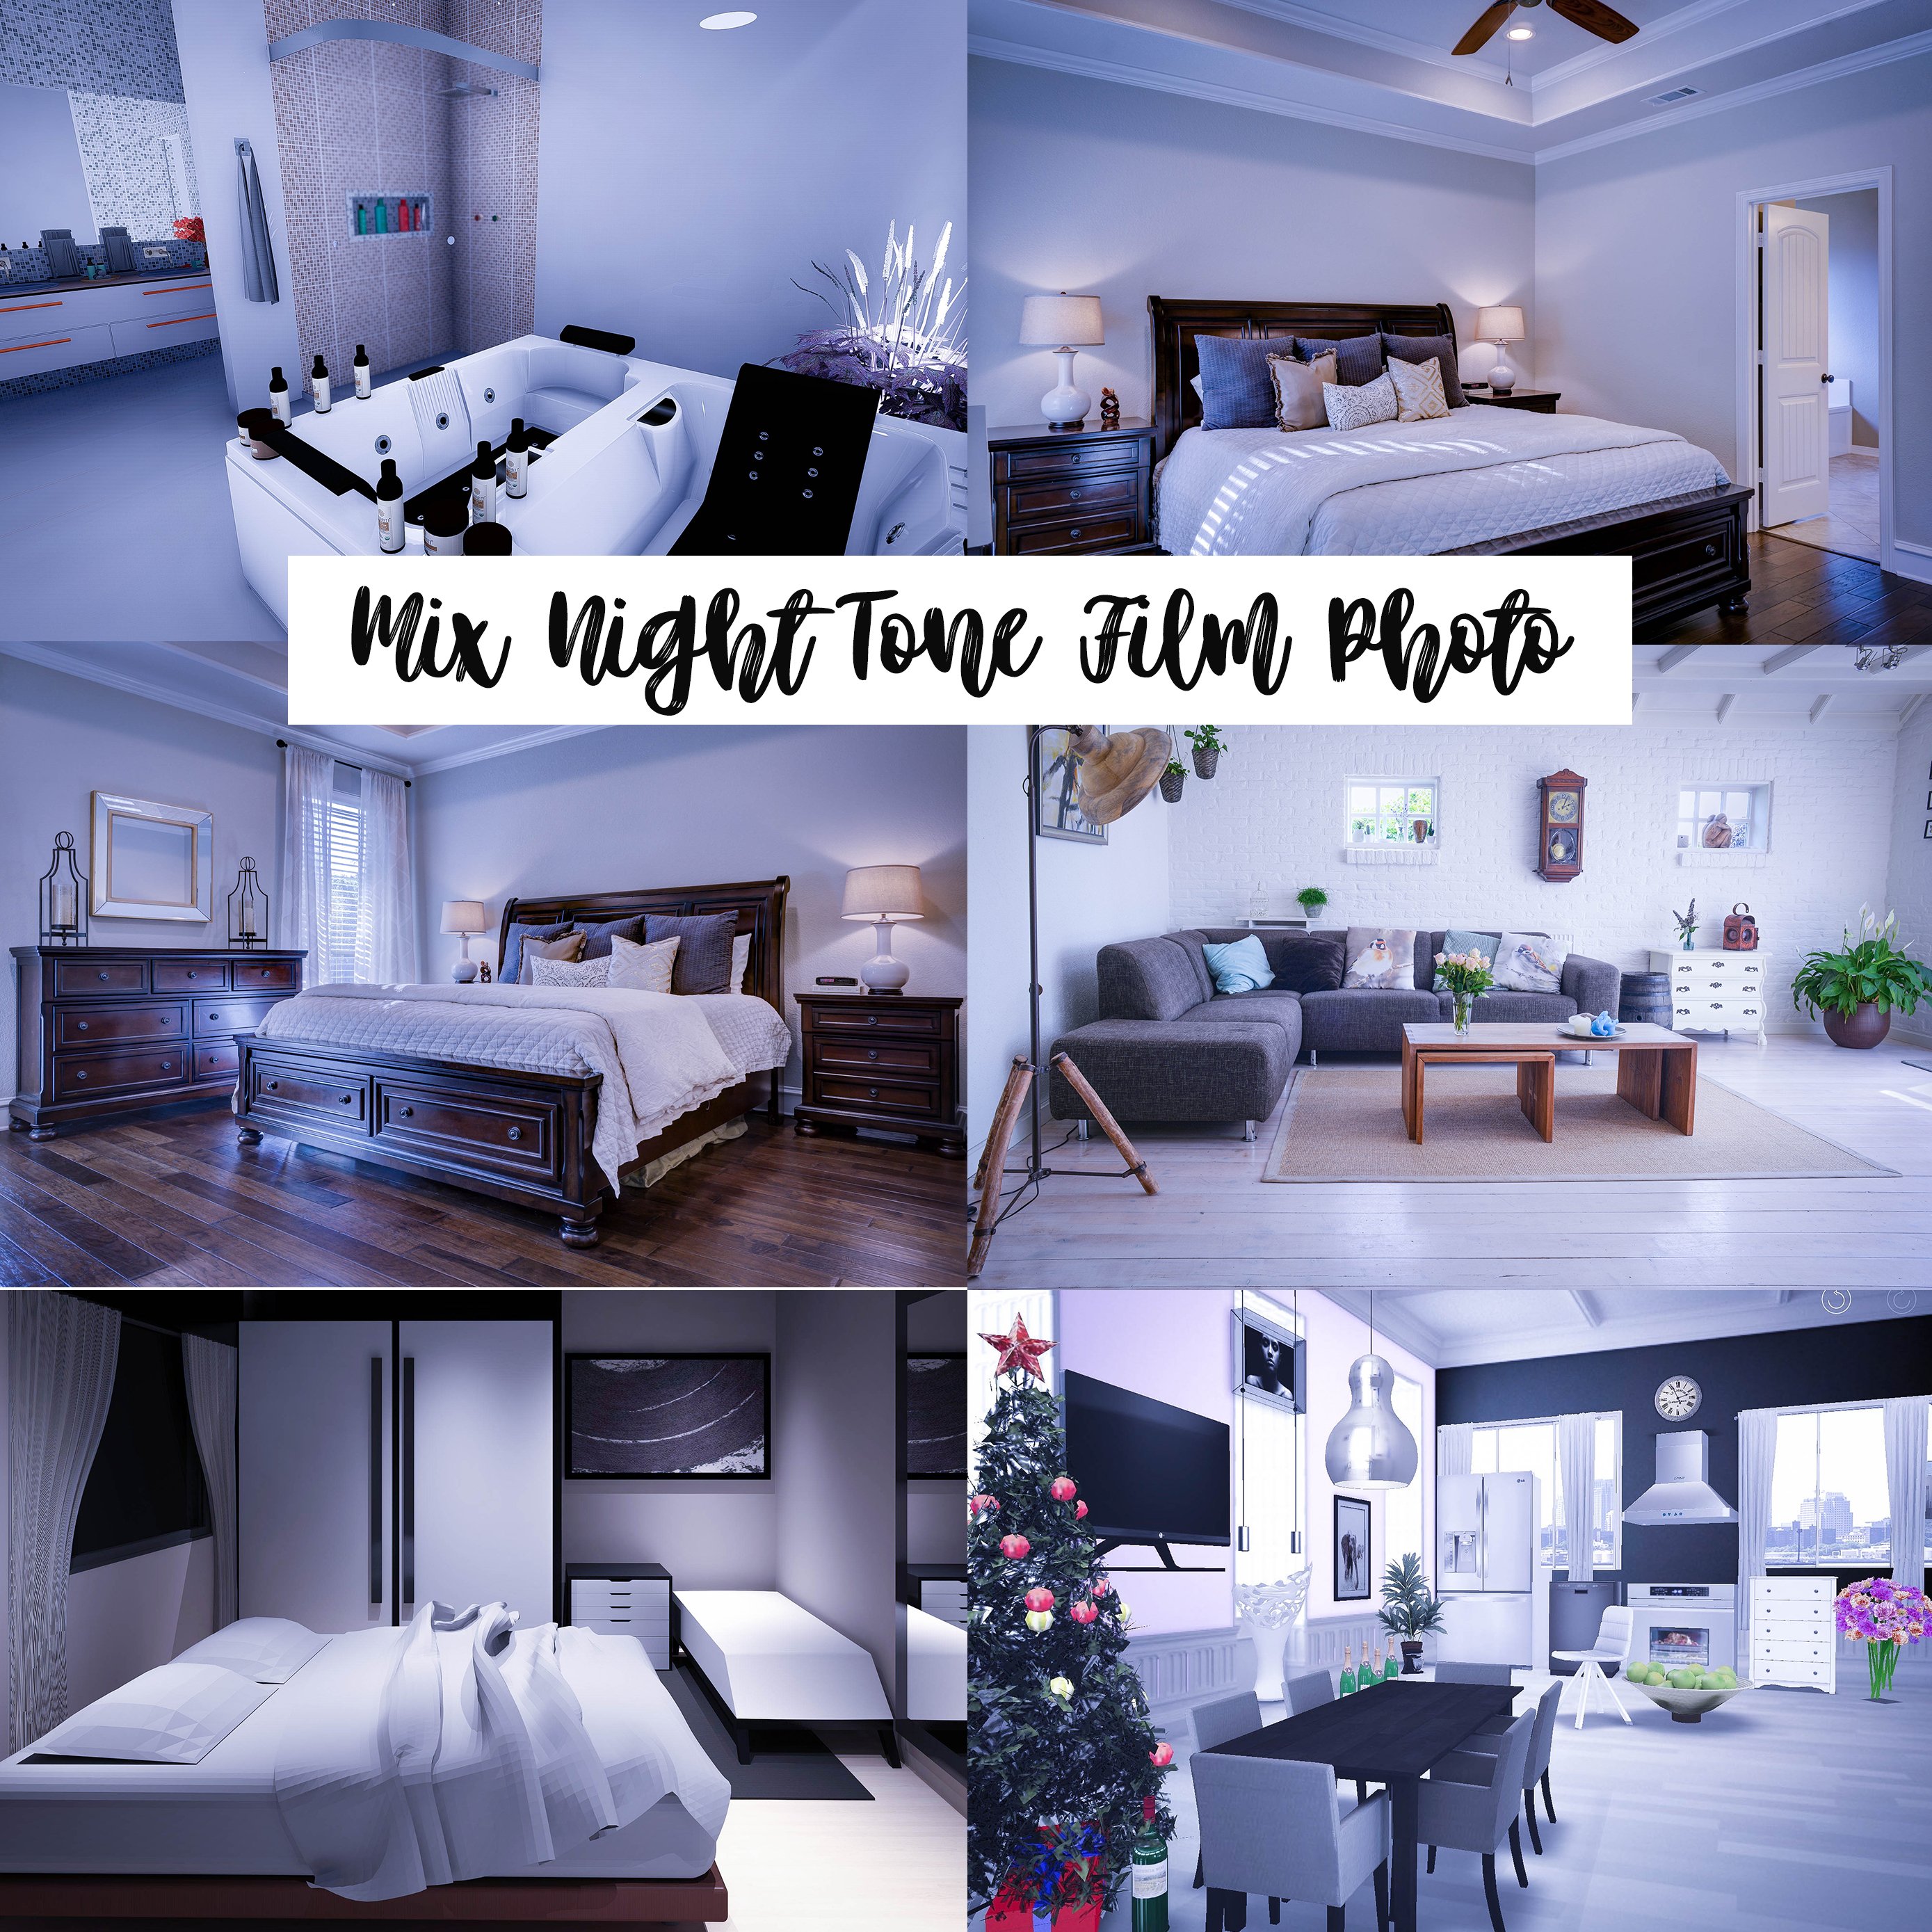 interior lightroom and photoshop presets by pixelspic mix night tone film photo after 120